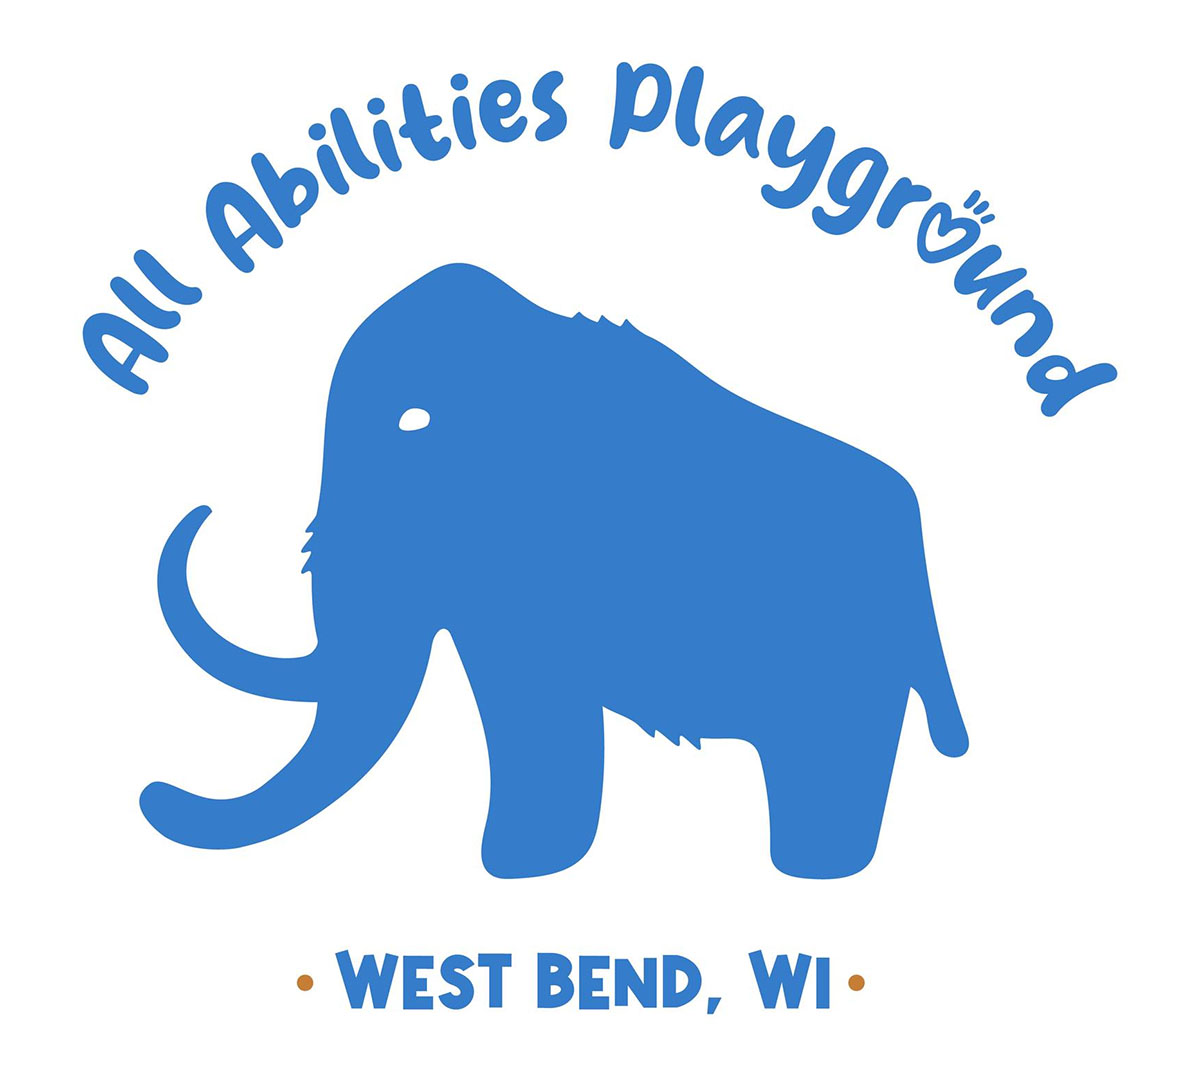 Logo design for the West Bend All Abilities Playground